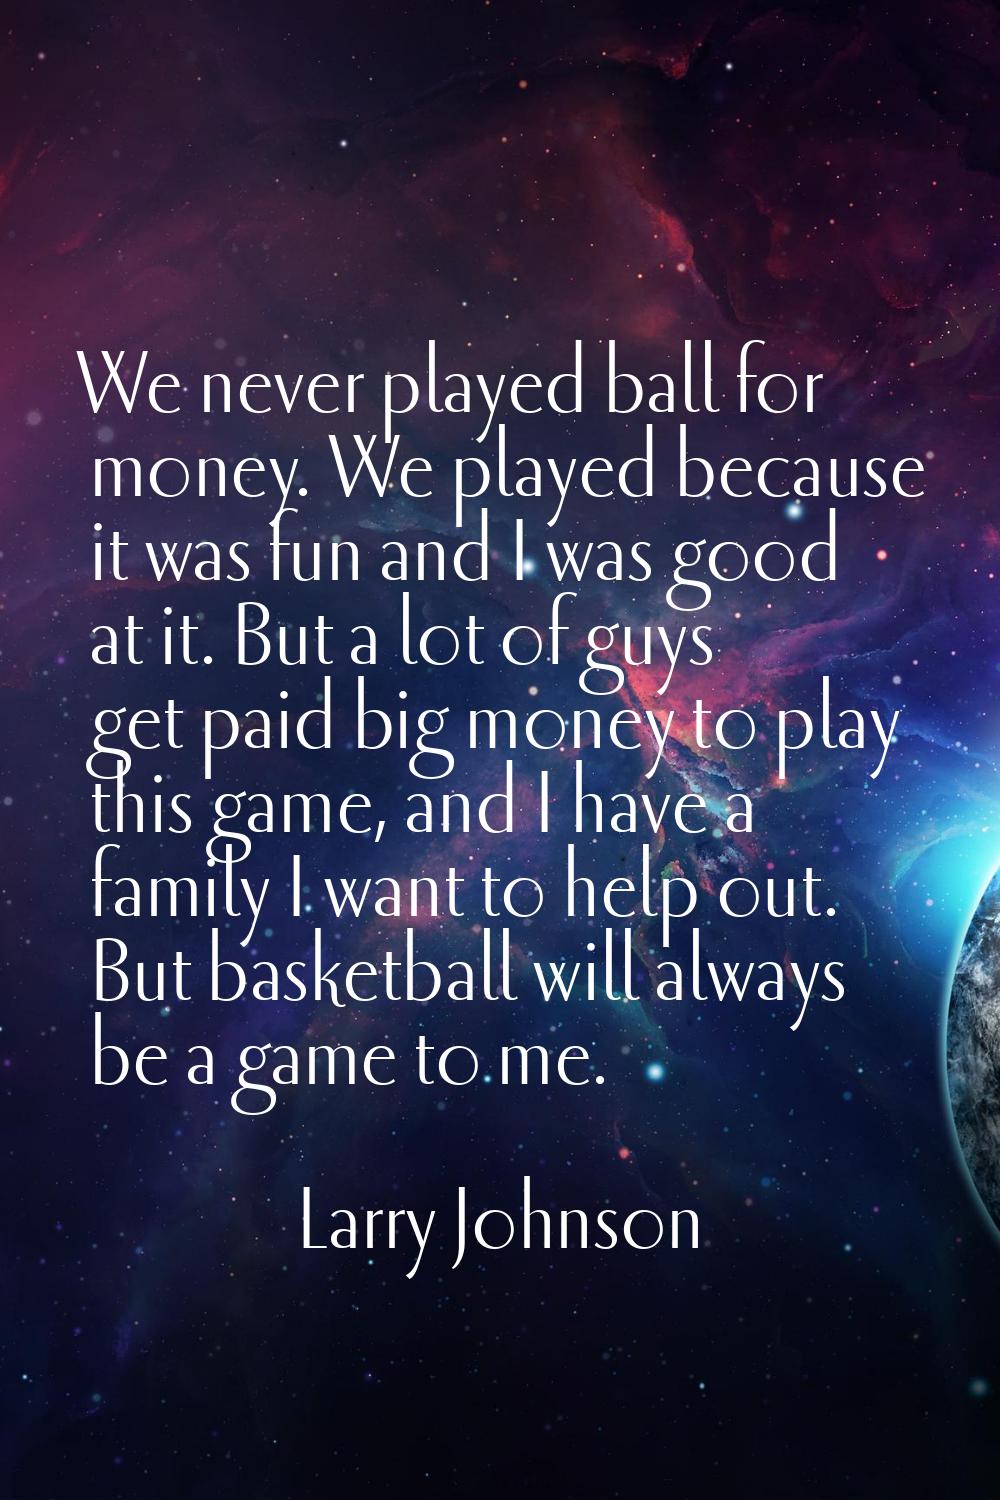 We never played ball for money. We played because it was fun and I was good at it. But a lot of guy